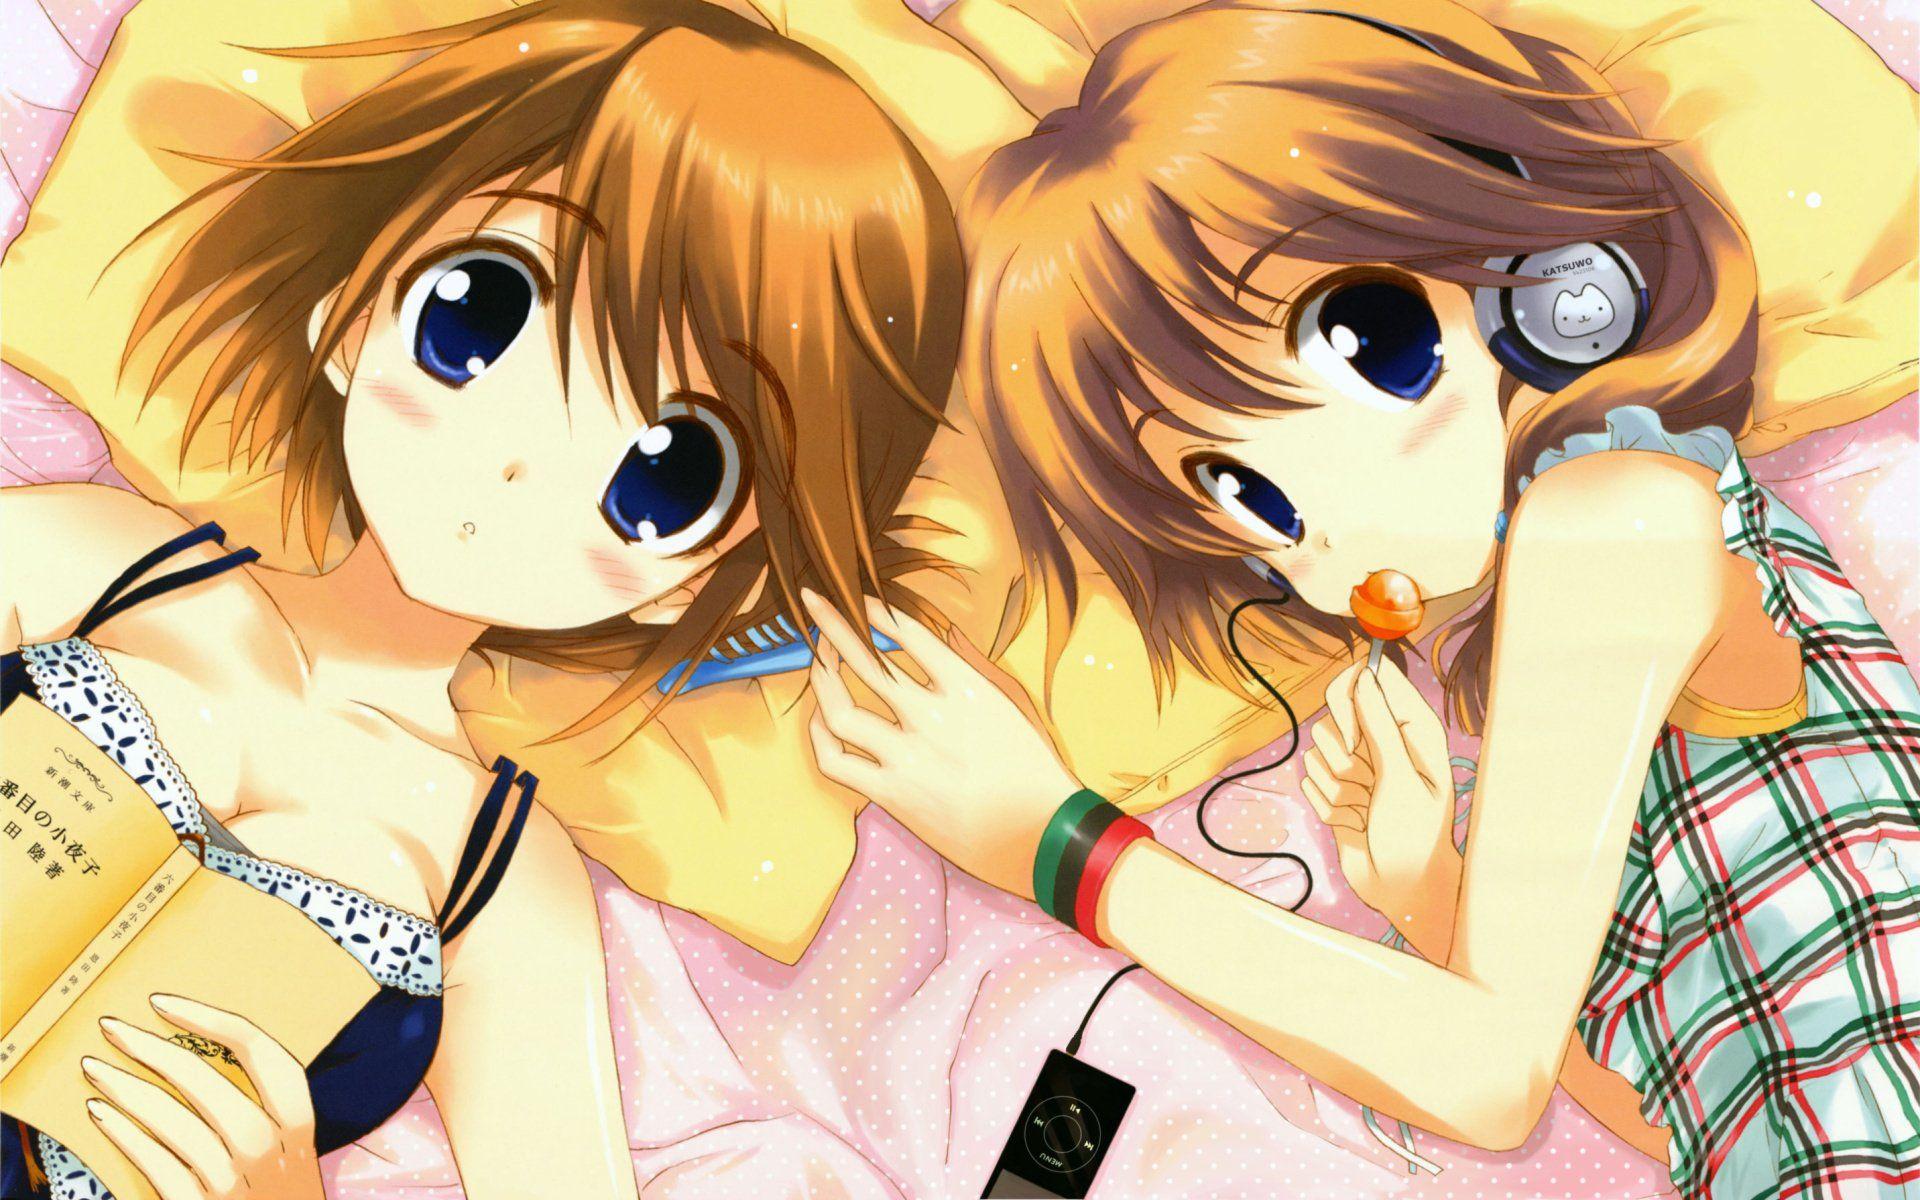 Anime Girl And Boy Friends Forever Wallpapers Wallpaper Cave